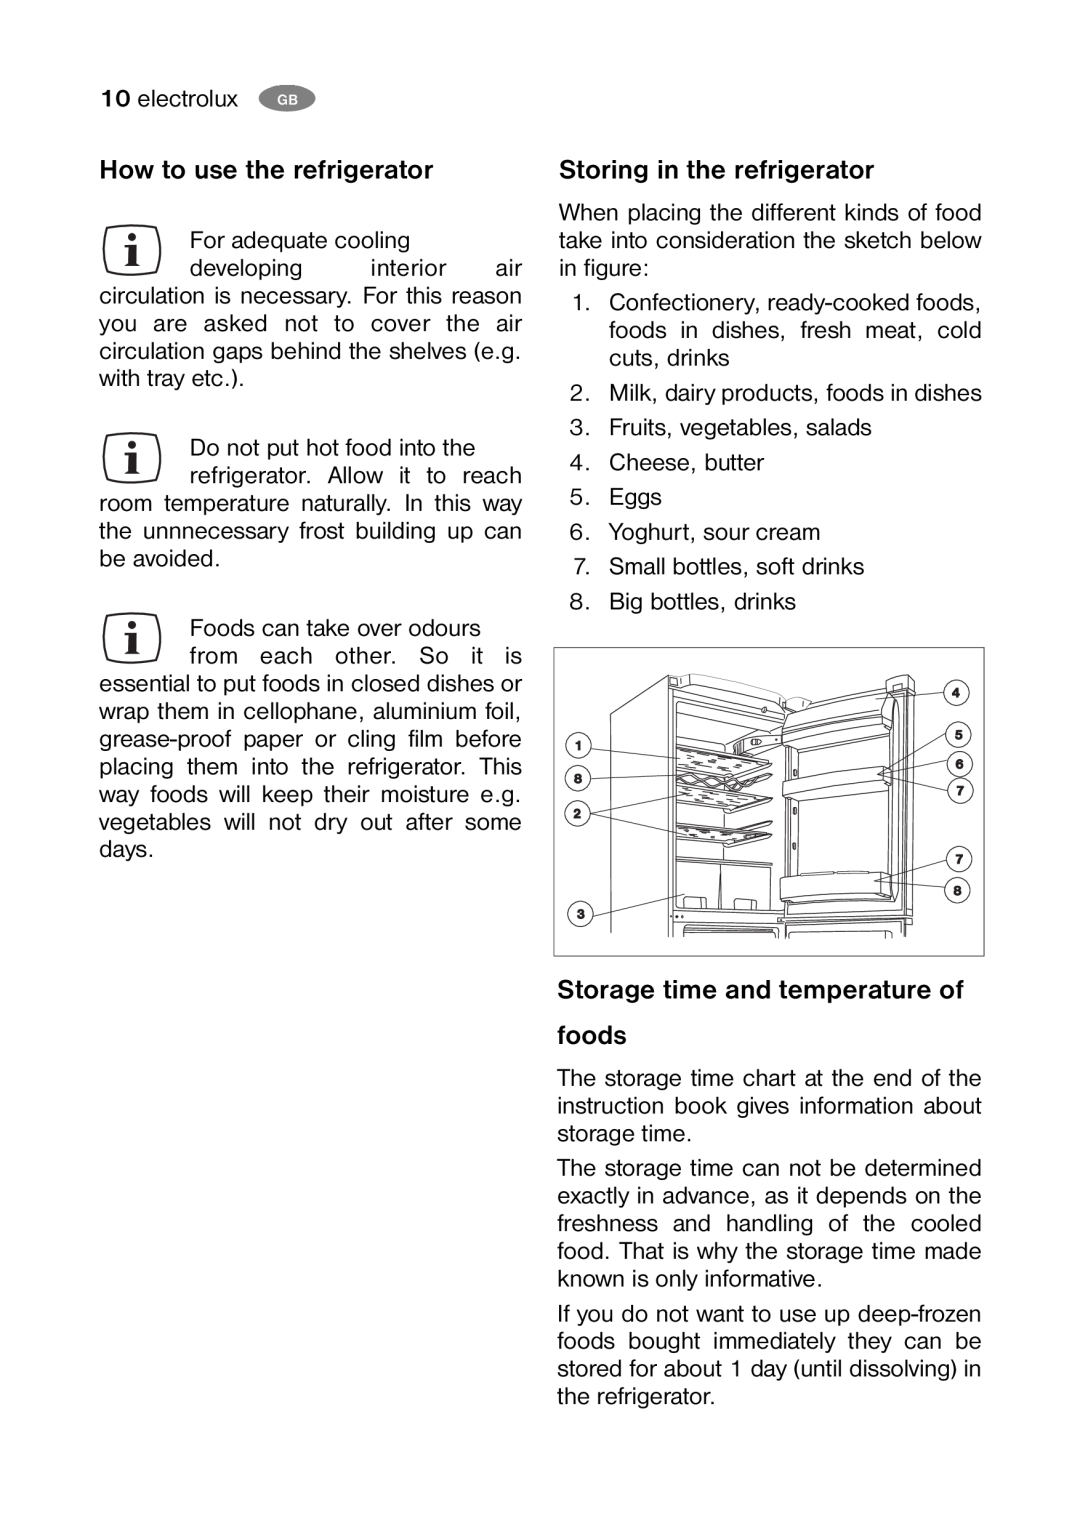 Electrolux ENB34000W How to use the refrigerator, Storing in the refrigerator, Storage time and temperature of foods 